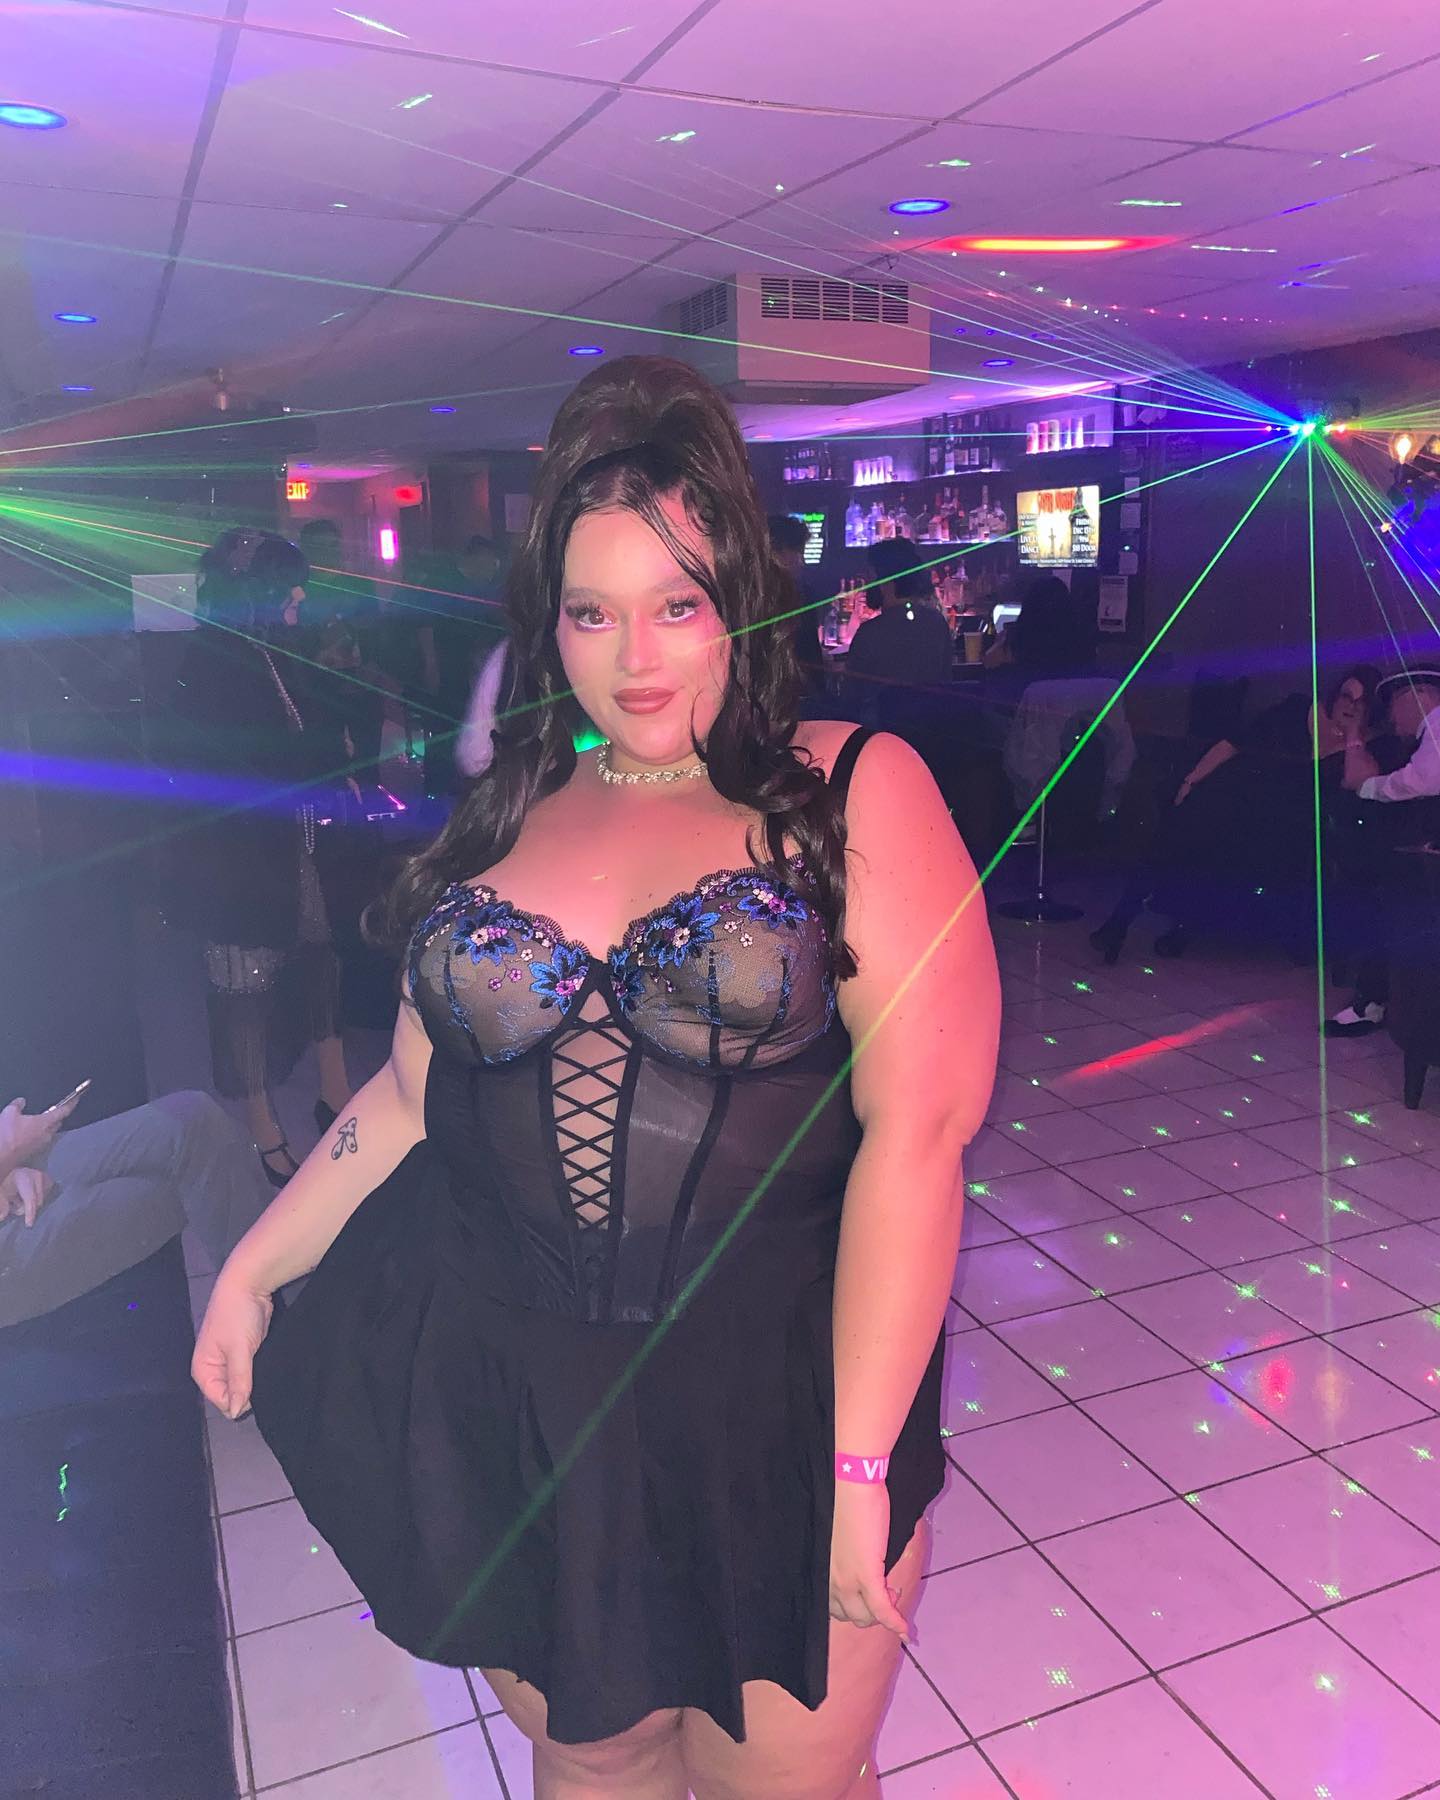 All eyes on me when I step in the room #savagexfenty #partygirl #barbie #baddie #plussizefashion #lingerie